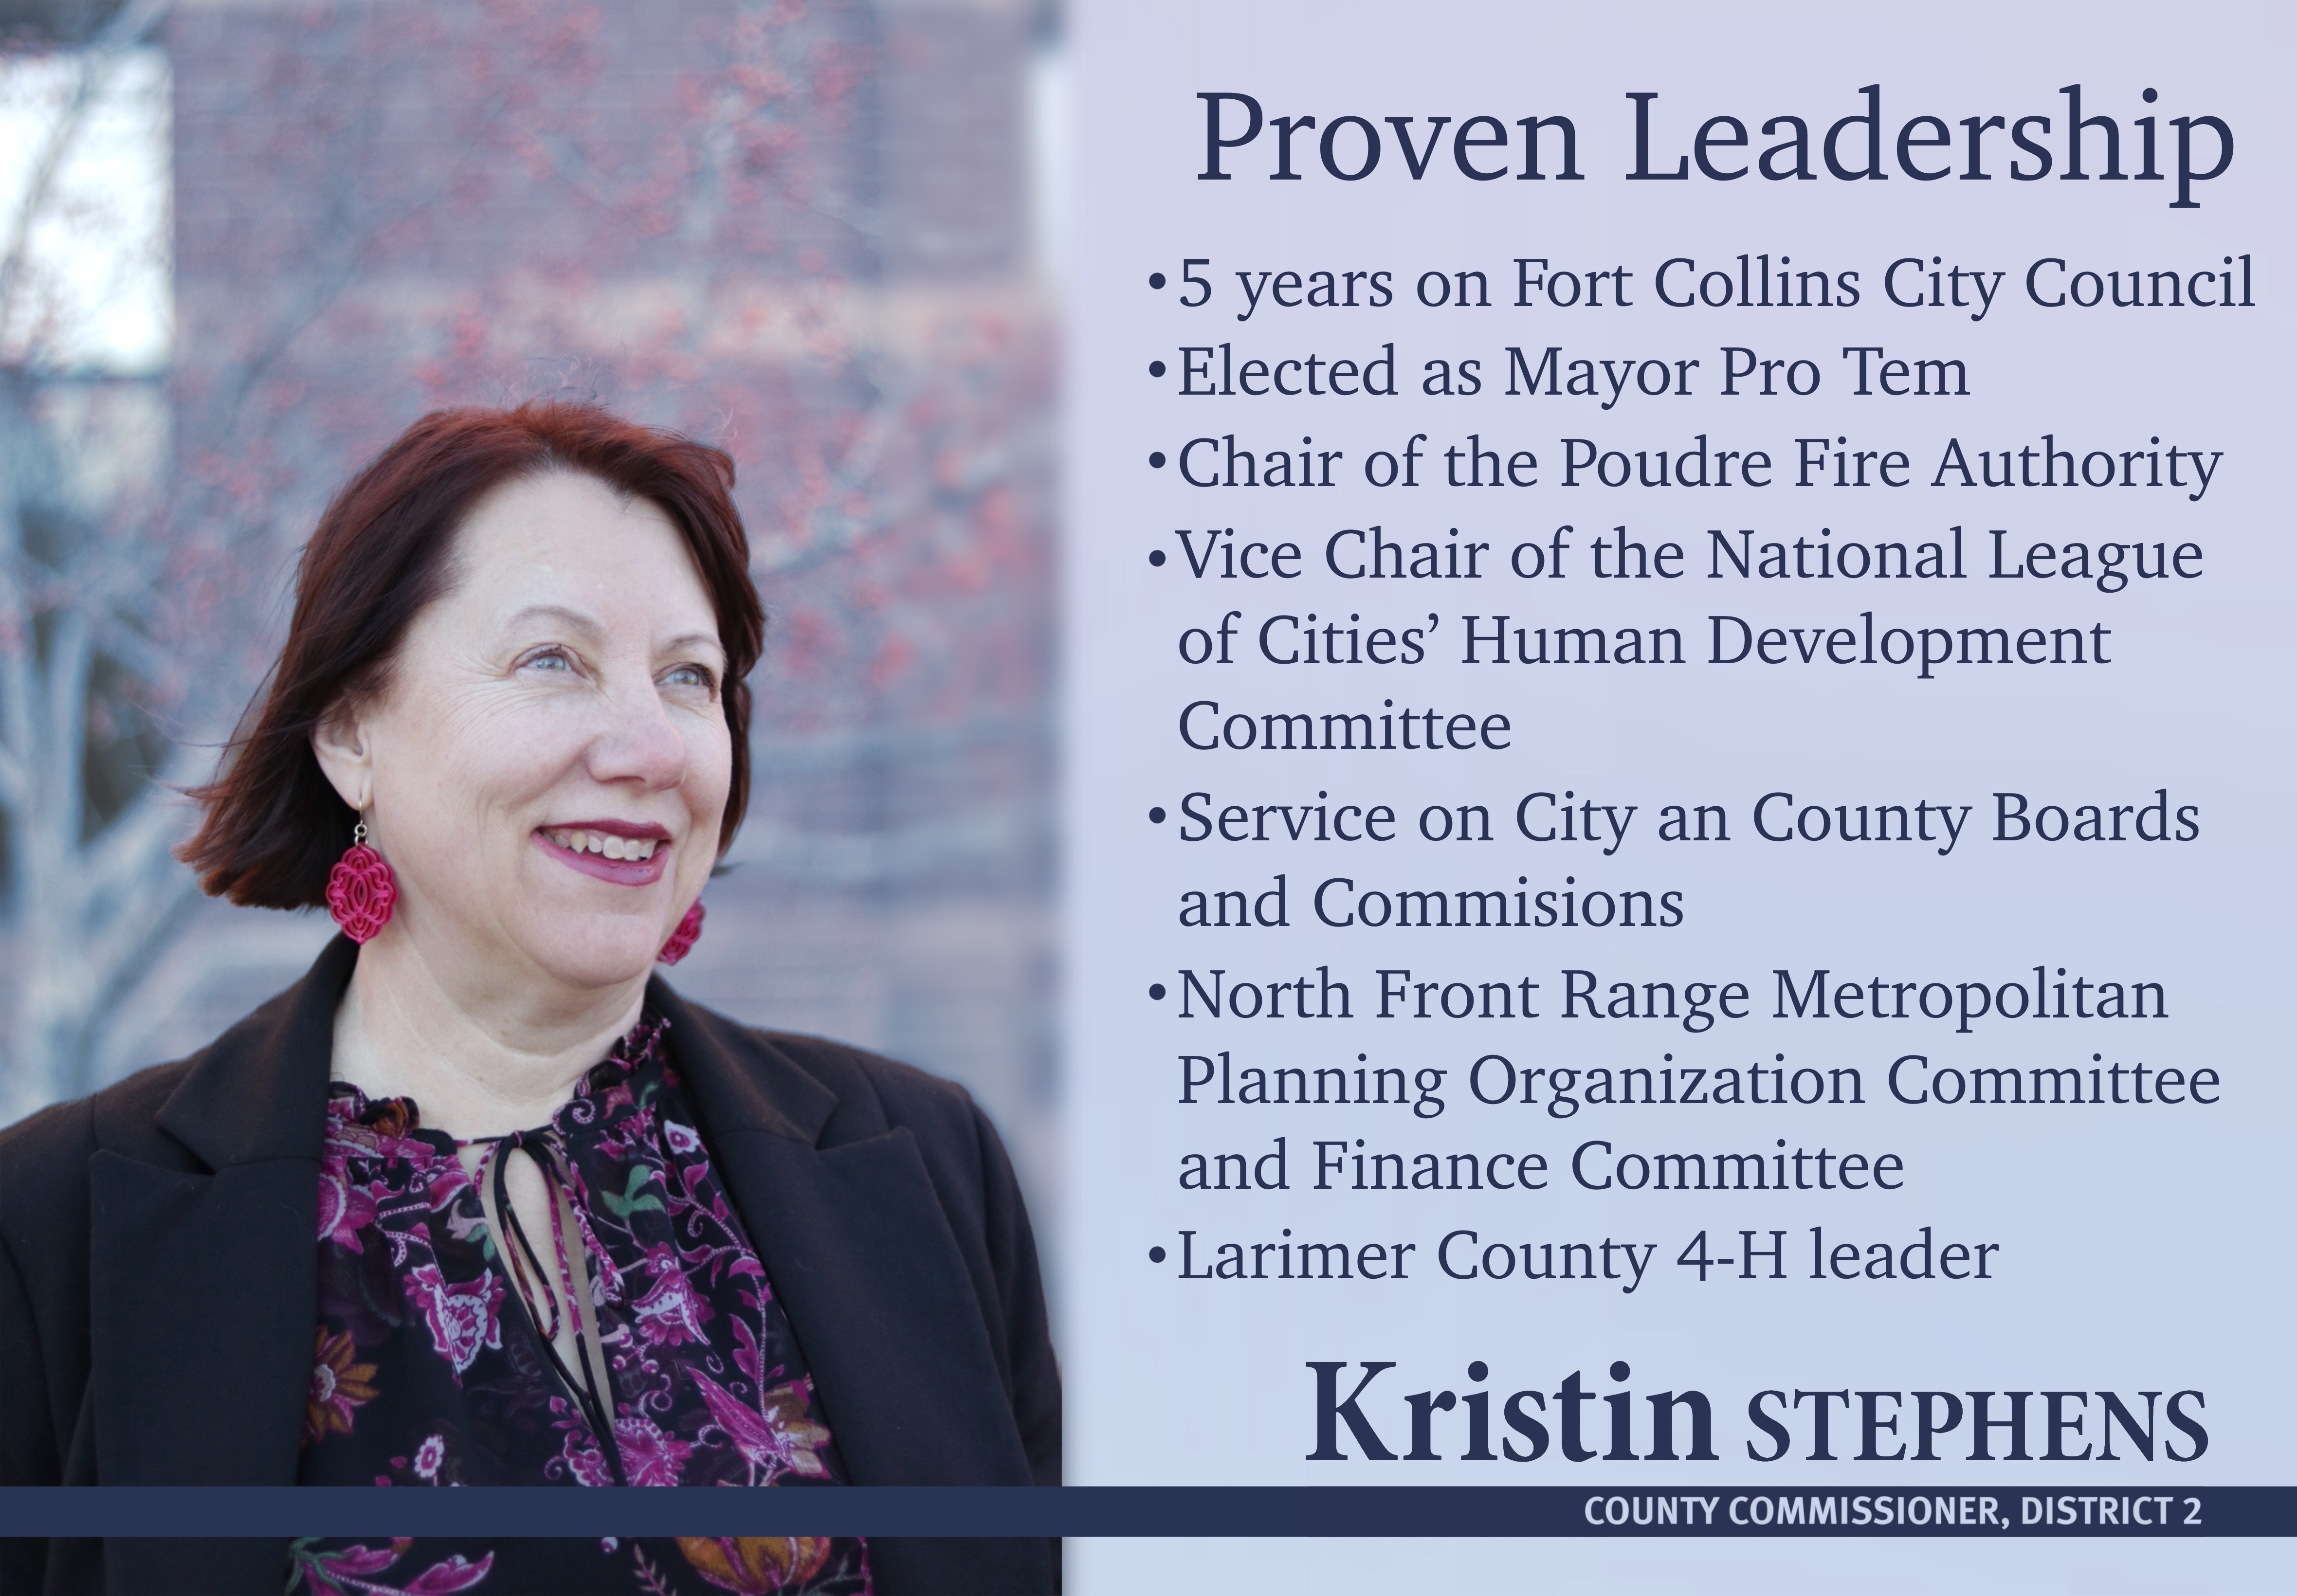 Proven Leadership • 5 years on Fort Collins City Council • Elected as Mayor Pro Tem • Chair of the Poudre Fire Authority • Vice Chair of the National League of Cities’ Human Development Committee • Service on City and County Boards and Commissions • North Front Range Metropolitan Planning Organization Commmittee and Finance Committee • Larimer County 4-H leader